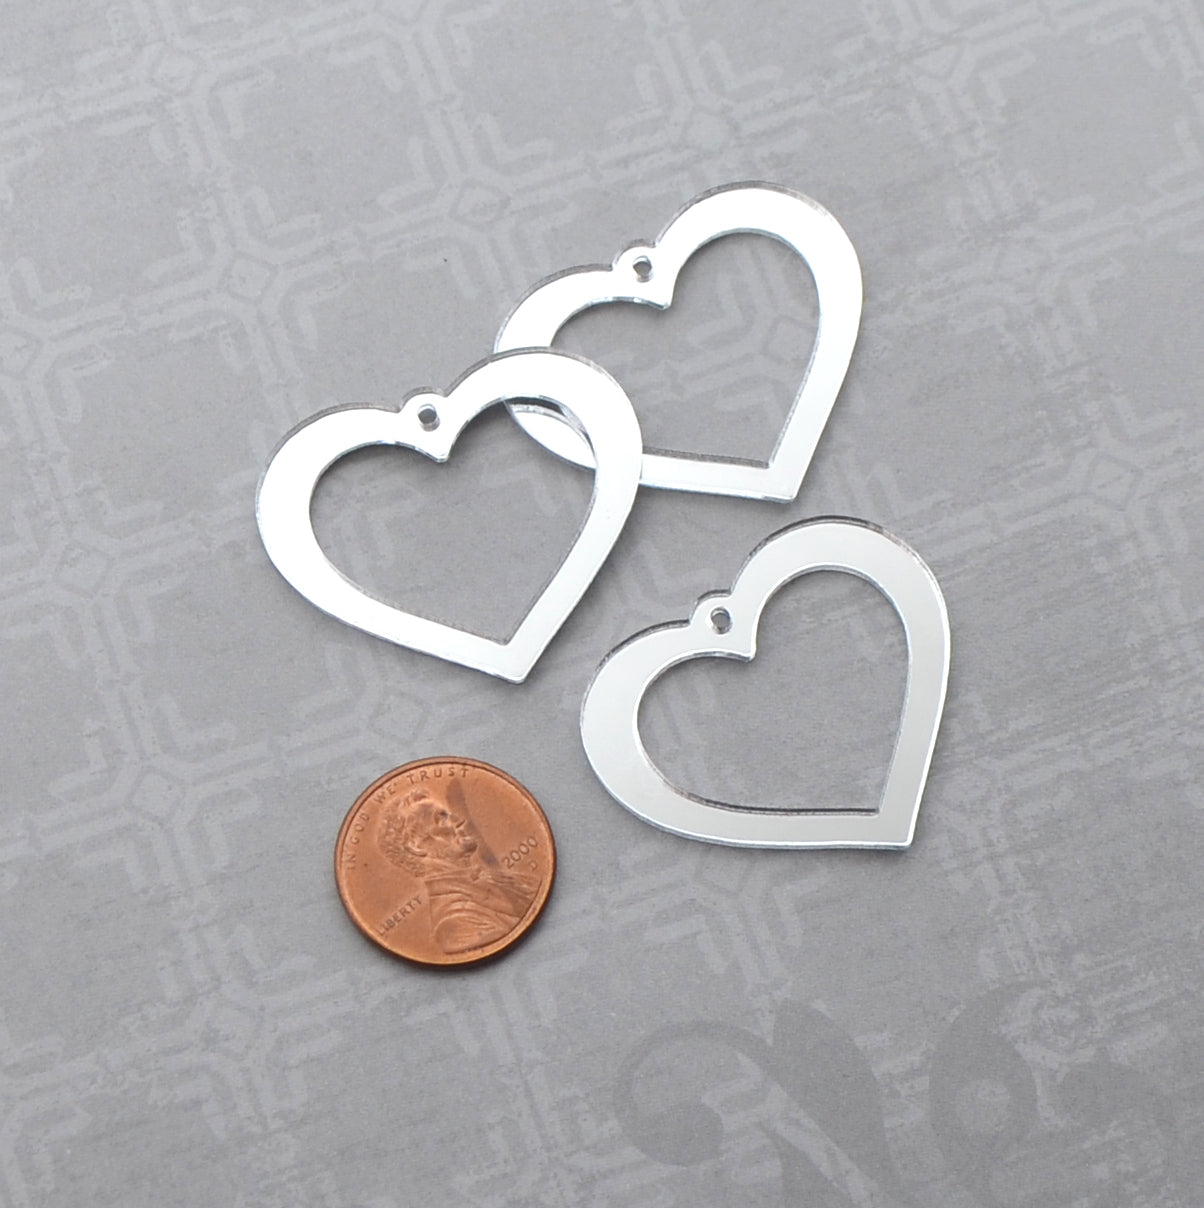 SILVER MIRROR Open HEART Charms Set of 3 - Laser Cut Acrylic Charms